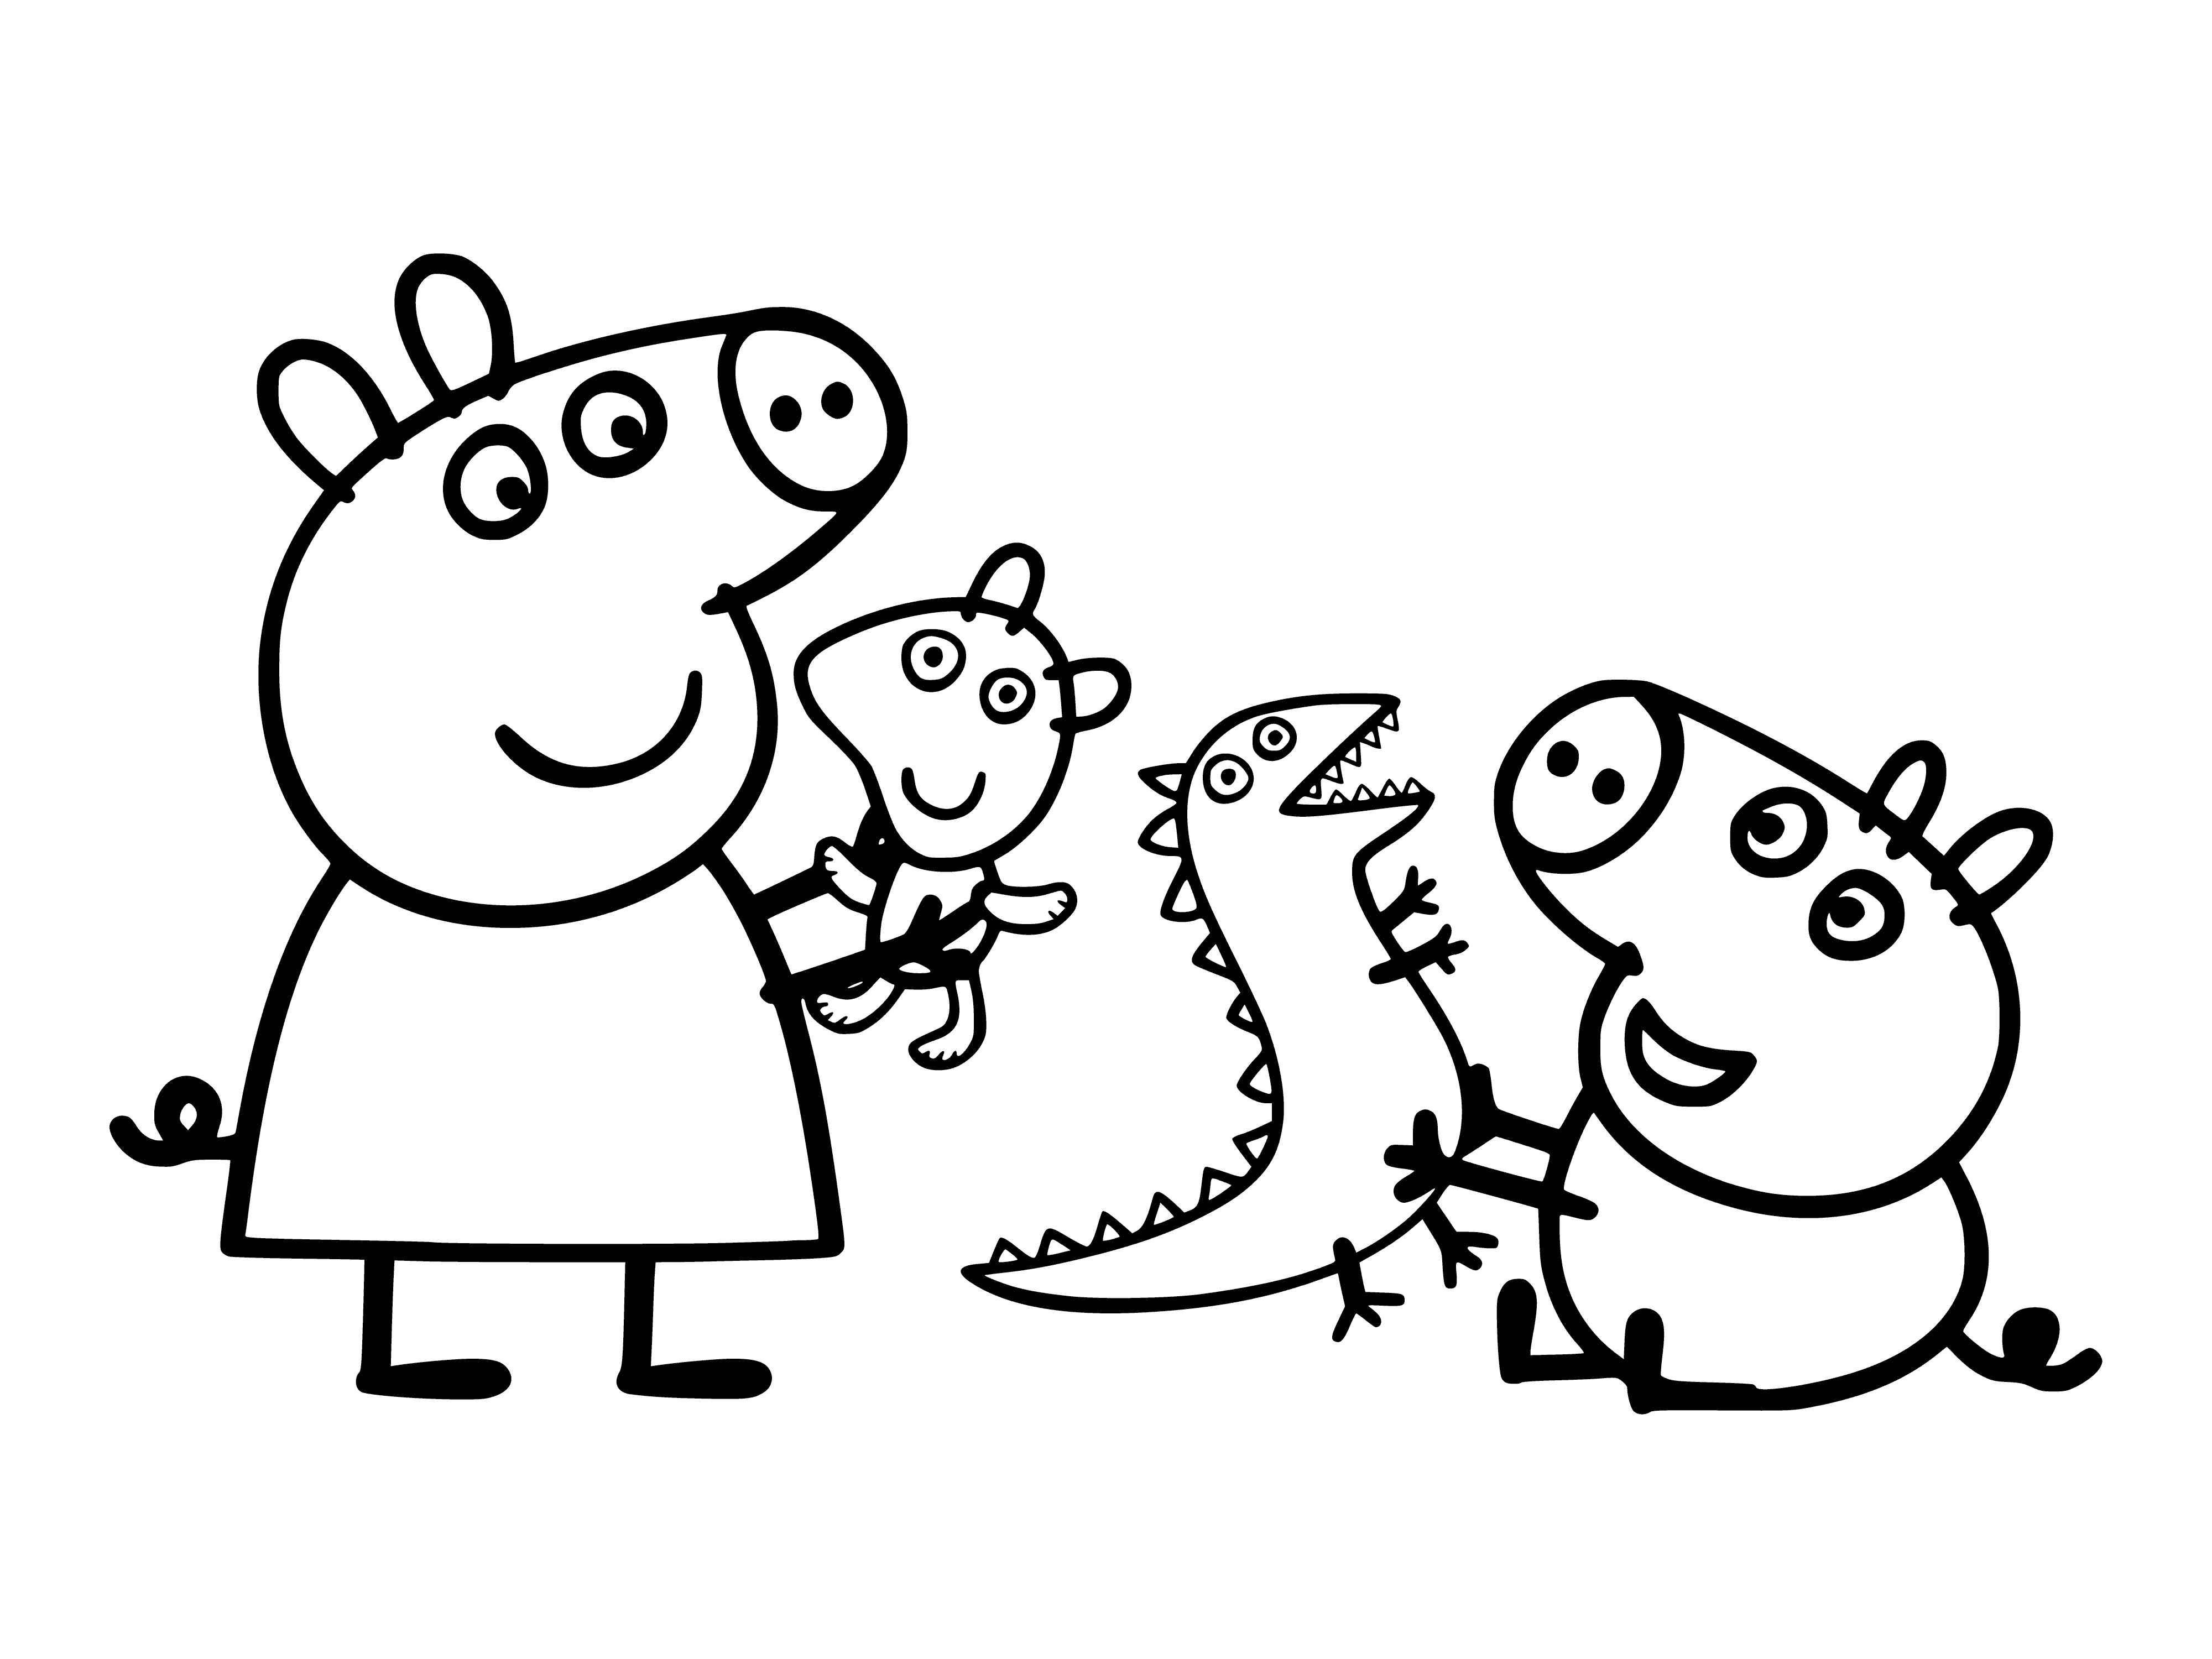 coloring page: Peppa and George are playing on the floor as she laughs at her brother crawling around her.